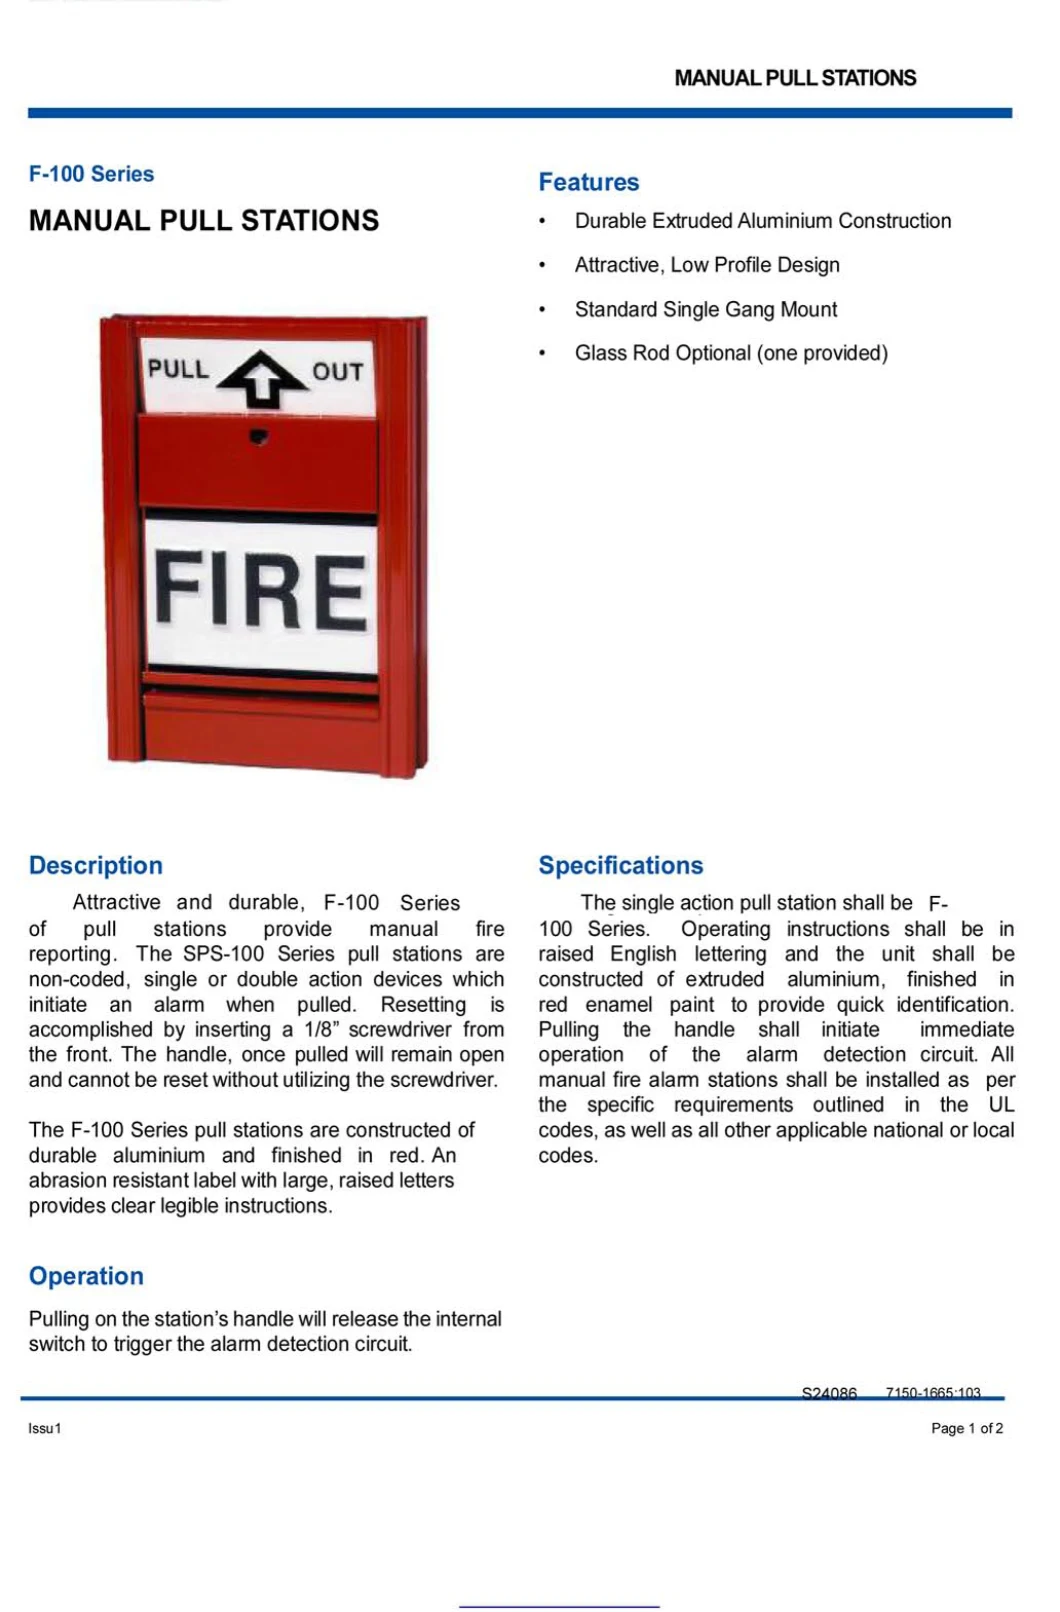 Conventional Fire Alarm Manual Call Point Fire Pull Station